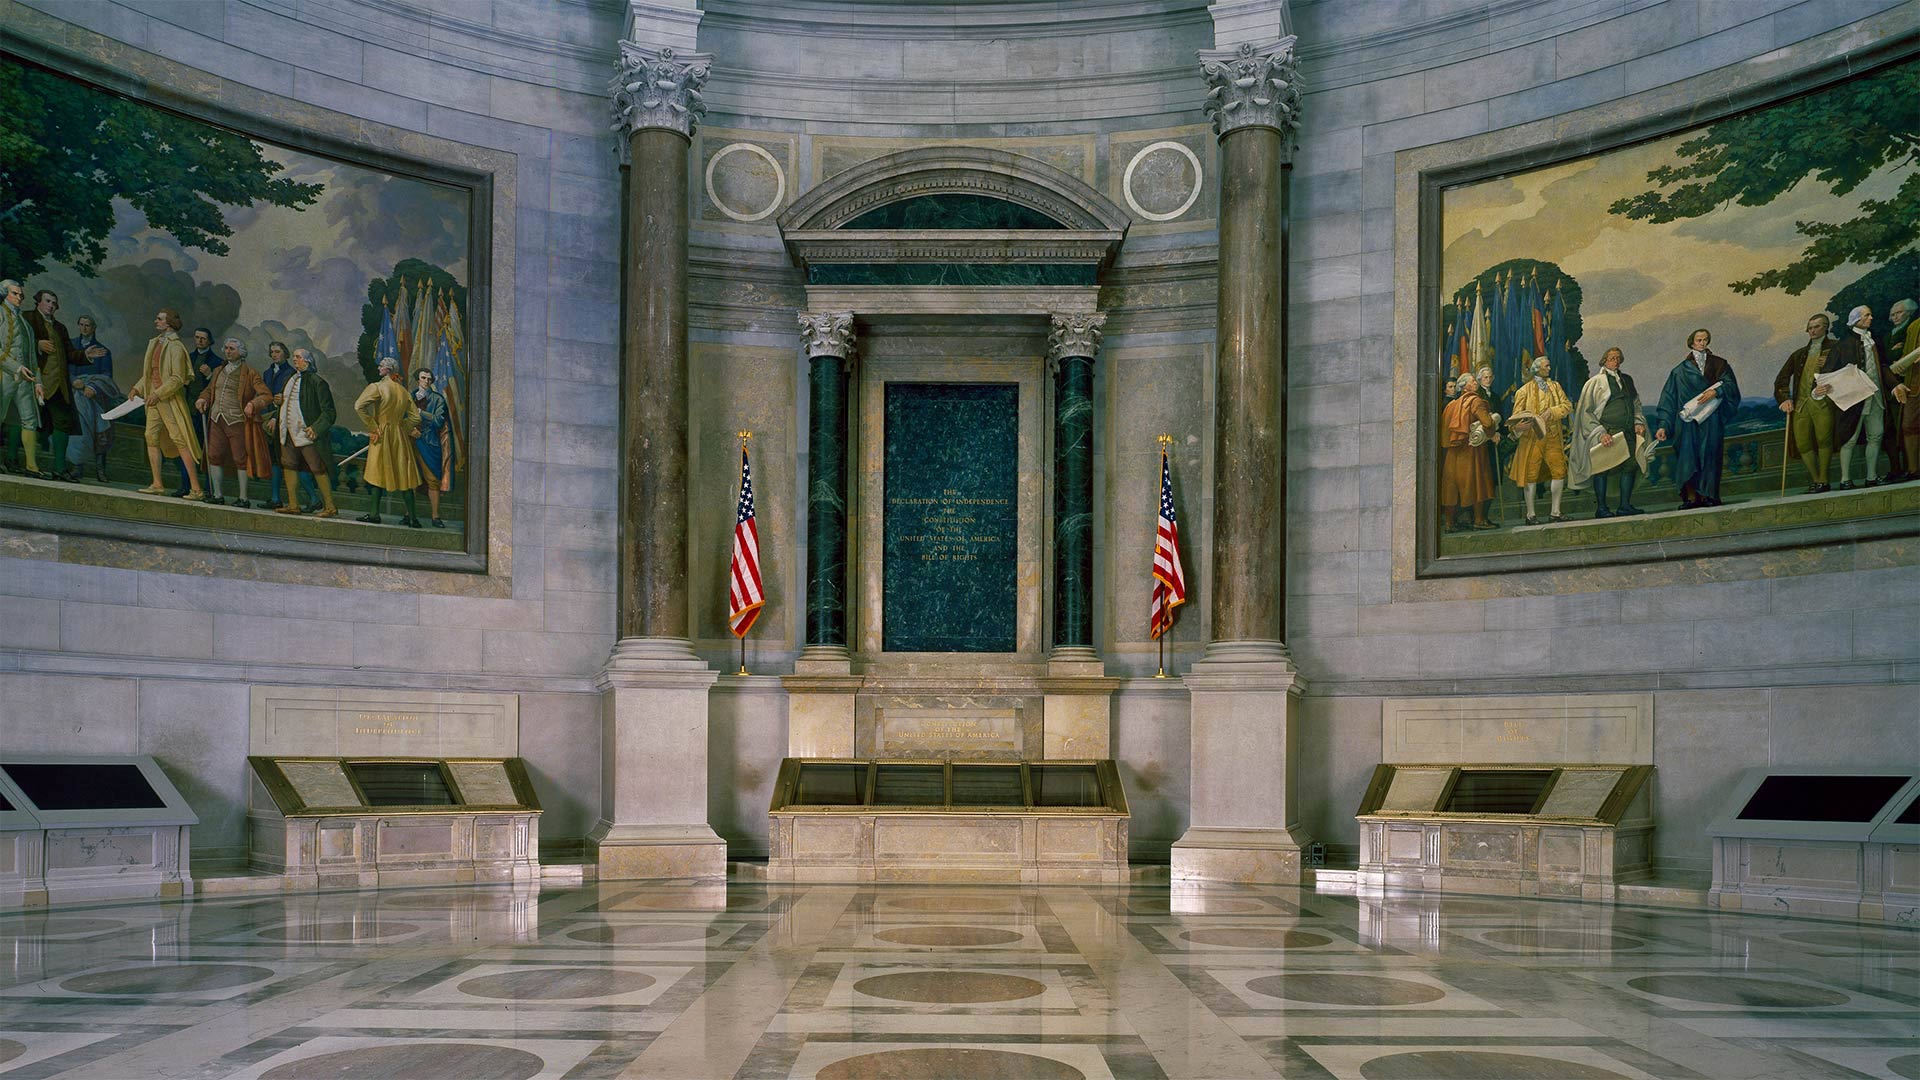 The US Constitution and the Declaration of Independence on display in the National Archives, Washington, DC - Carol M. Highsmith/Buyenlarge/Getty Images)